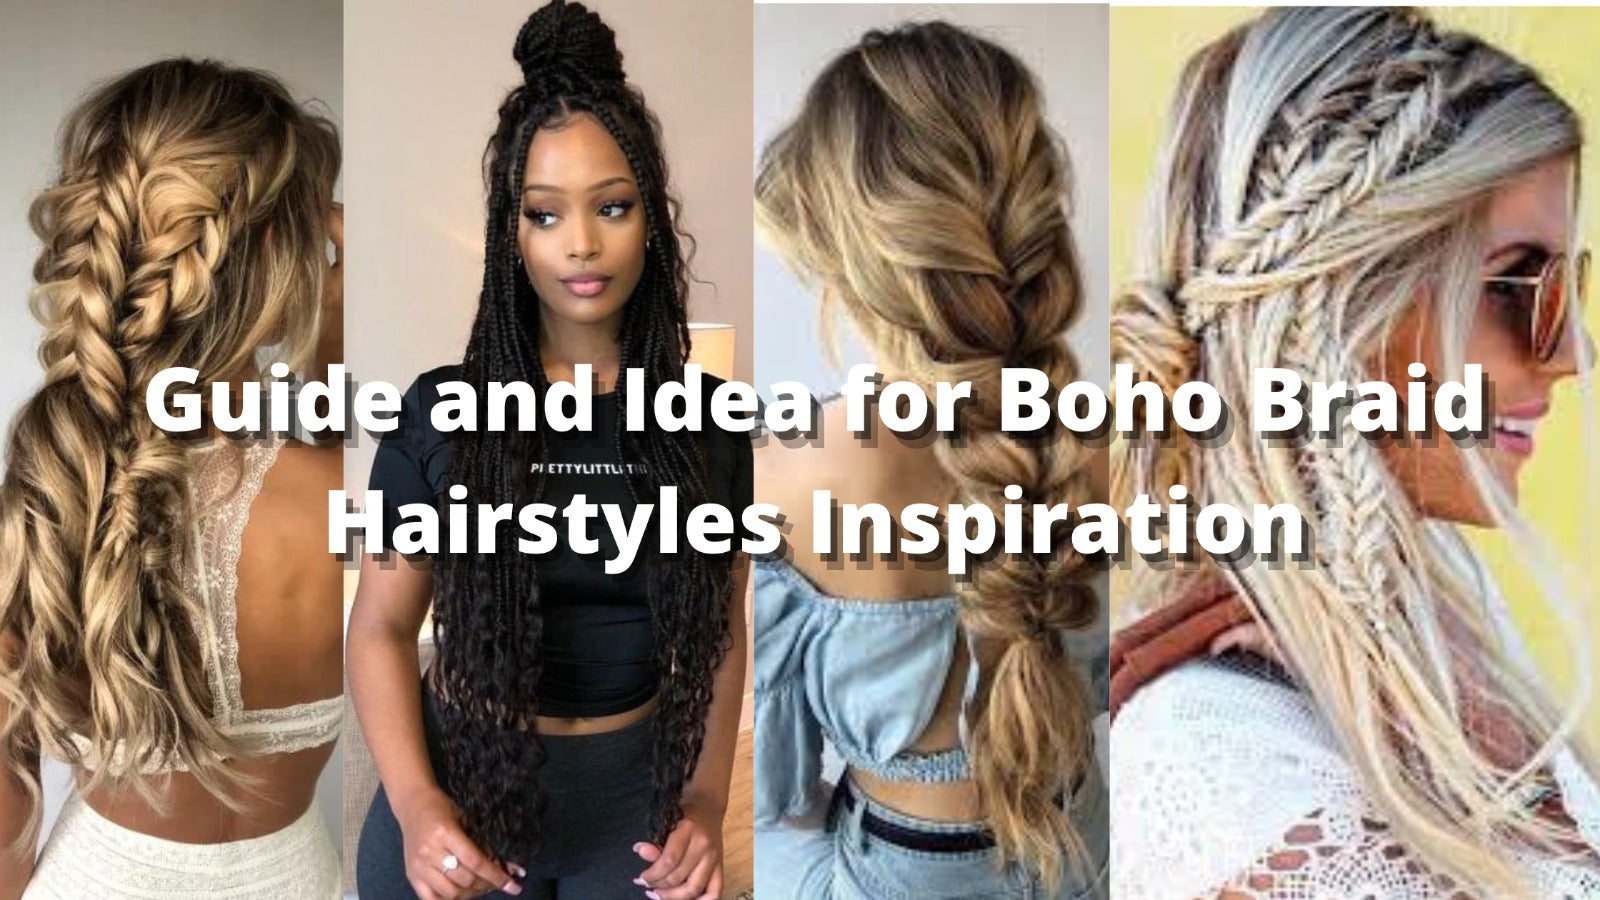 Guide and Ideas for Boho Braid Hairstyles Inspiration